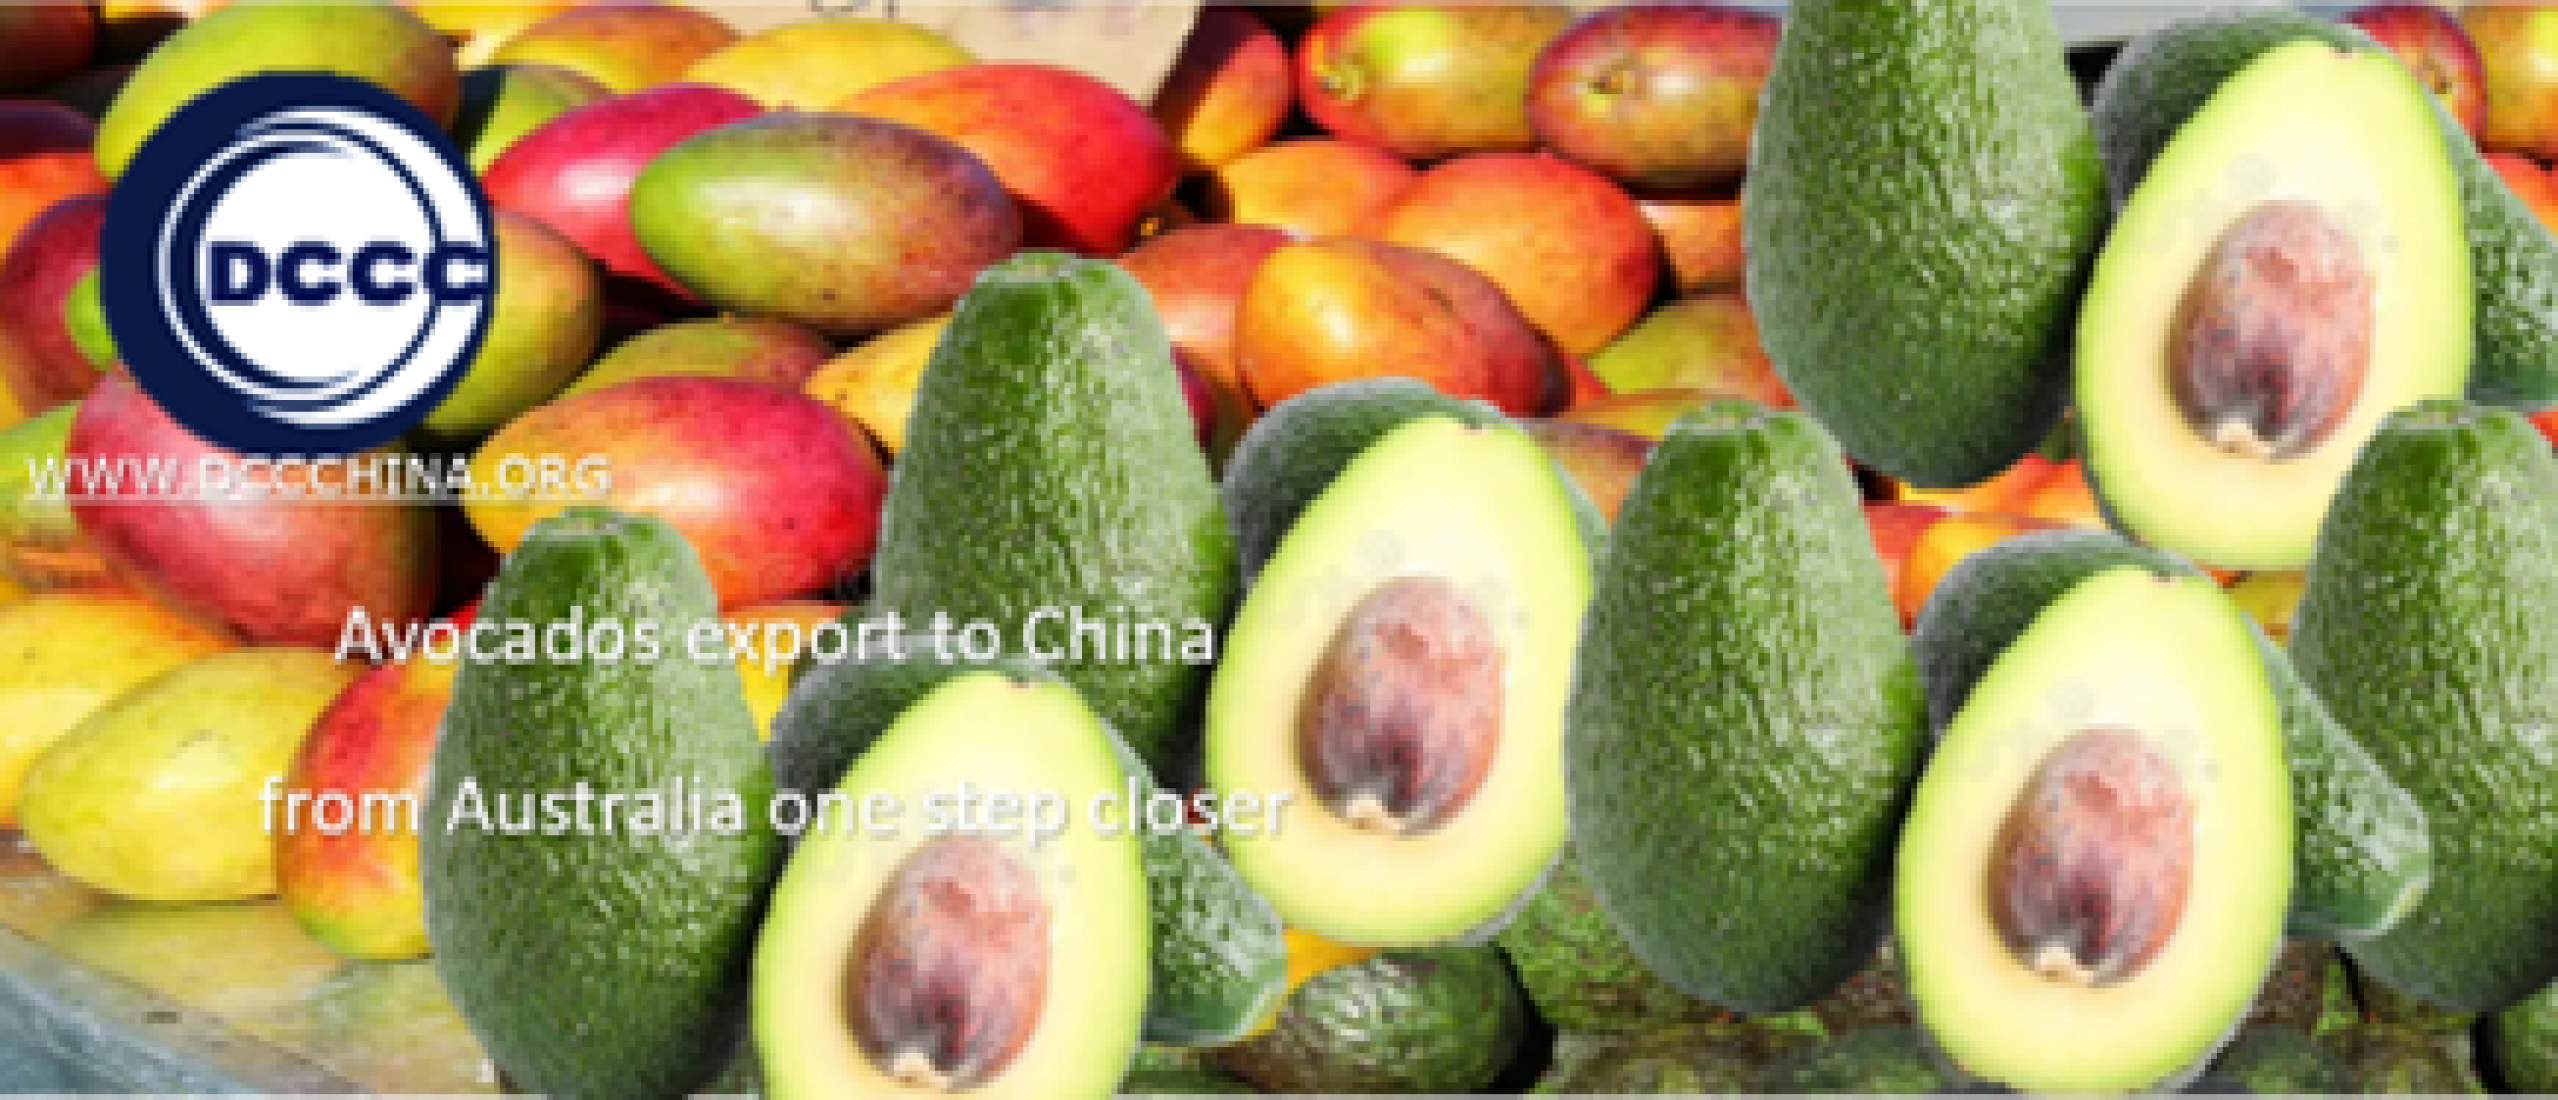 Avocados export to China from Australia one step closer